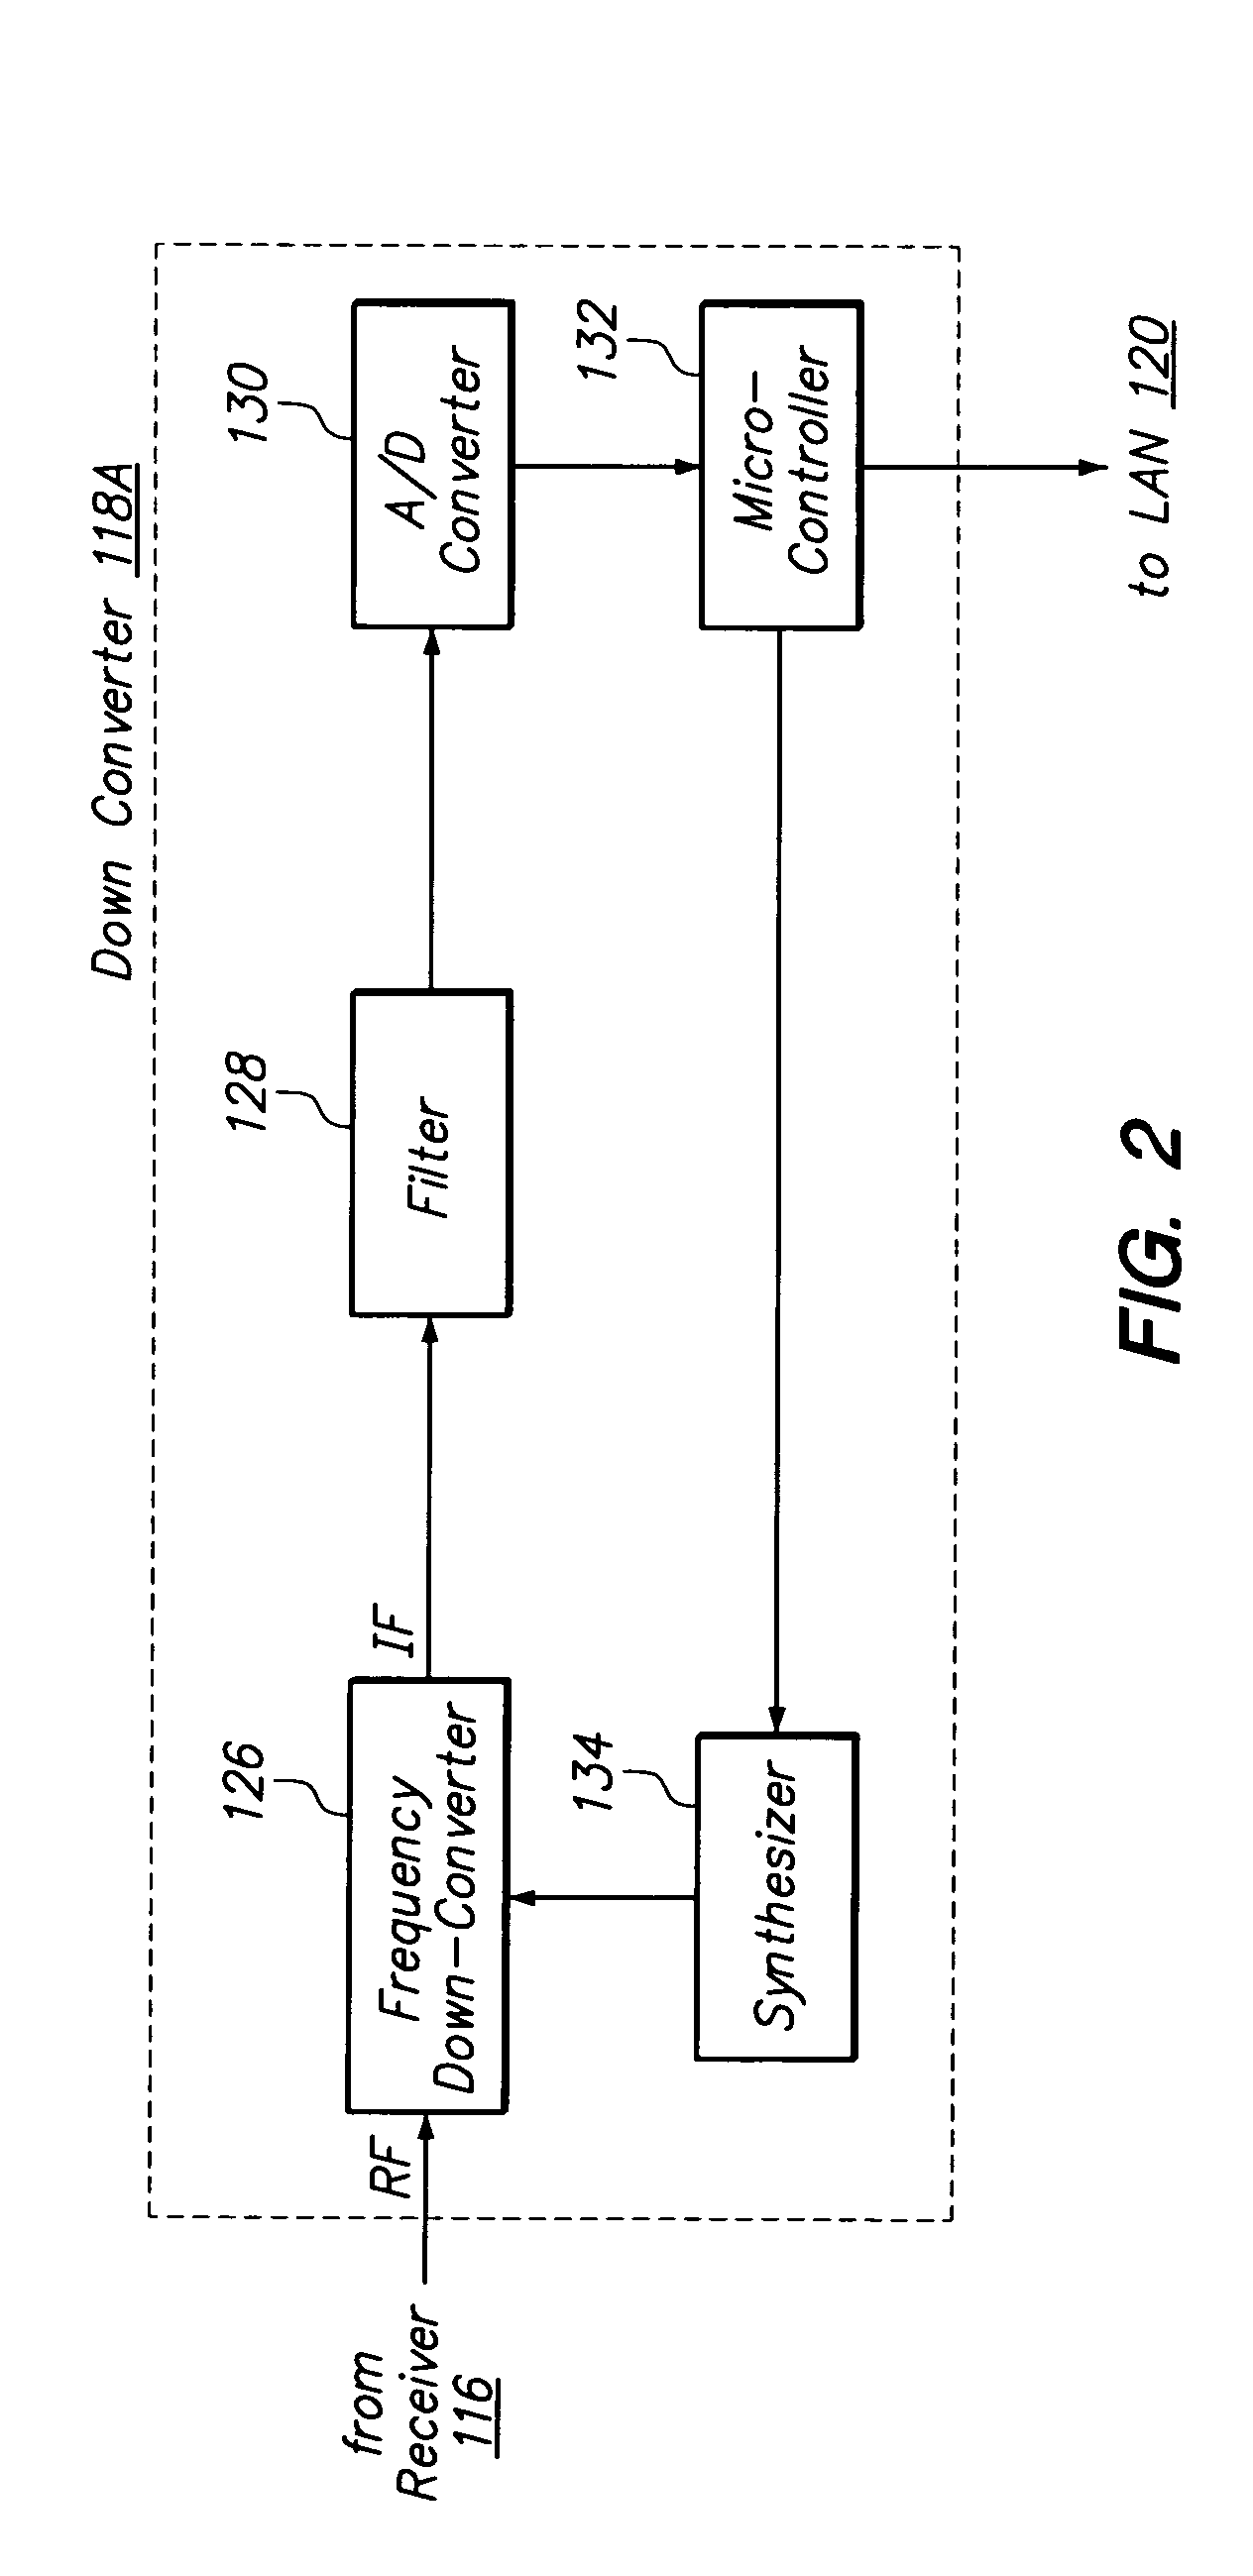 System for and method of providing remote coverage area for wireless communications